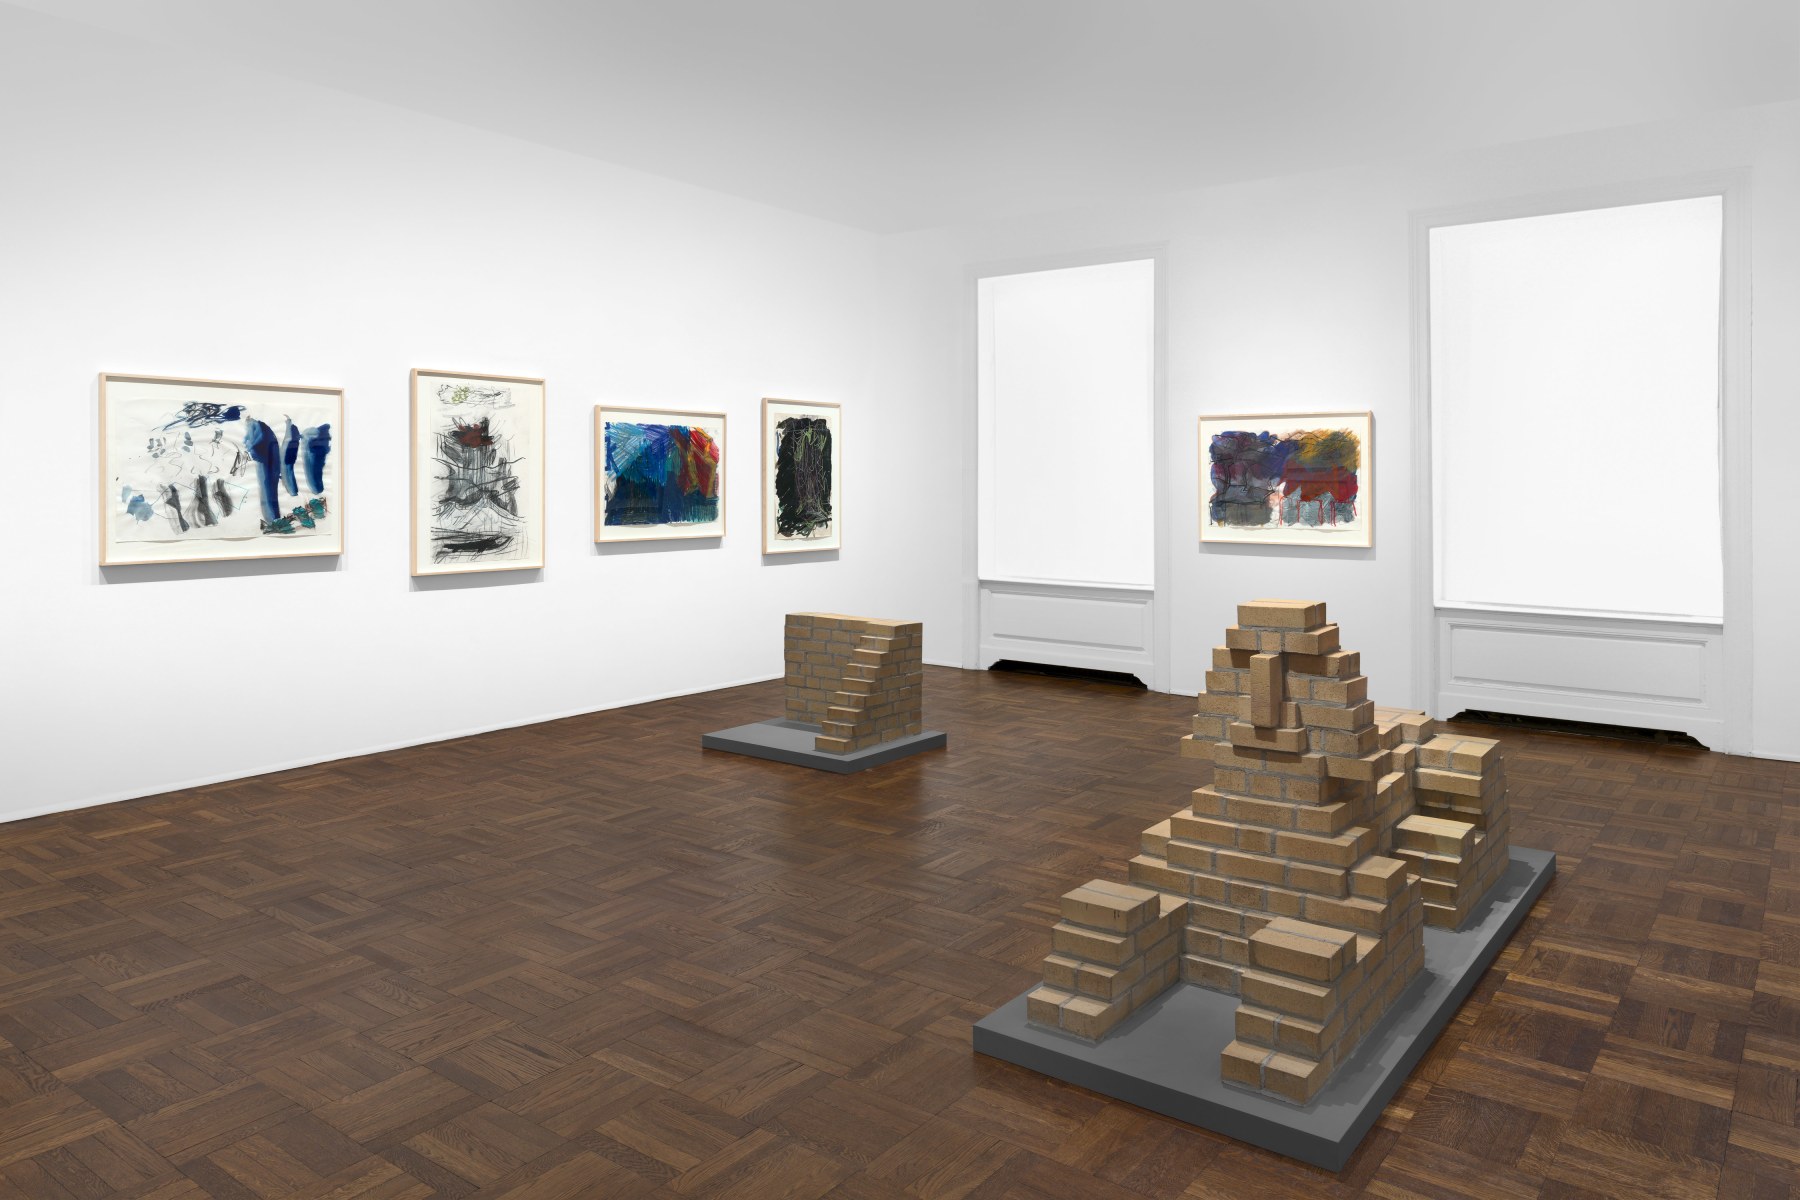 PER KIRKEBY Works on Paper, Works in Brick 20 November 2019 through 25 January 2020 UPPER EAST SIDE, NEW YORK, Installation View 9